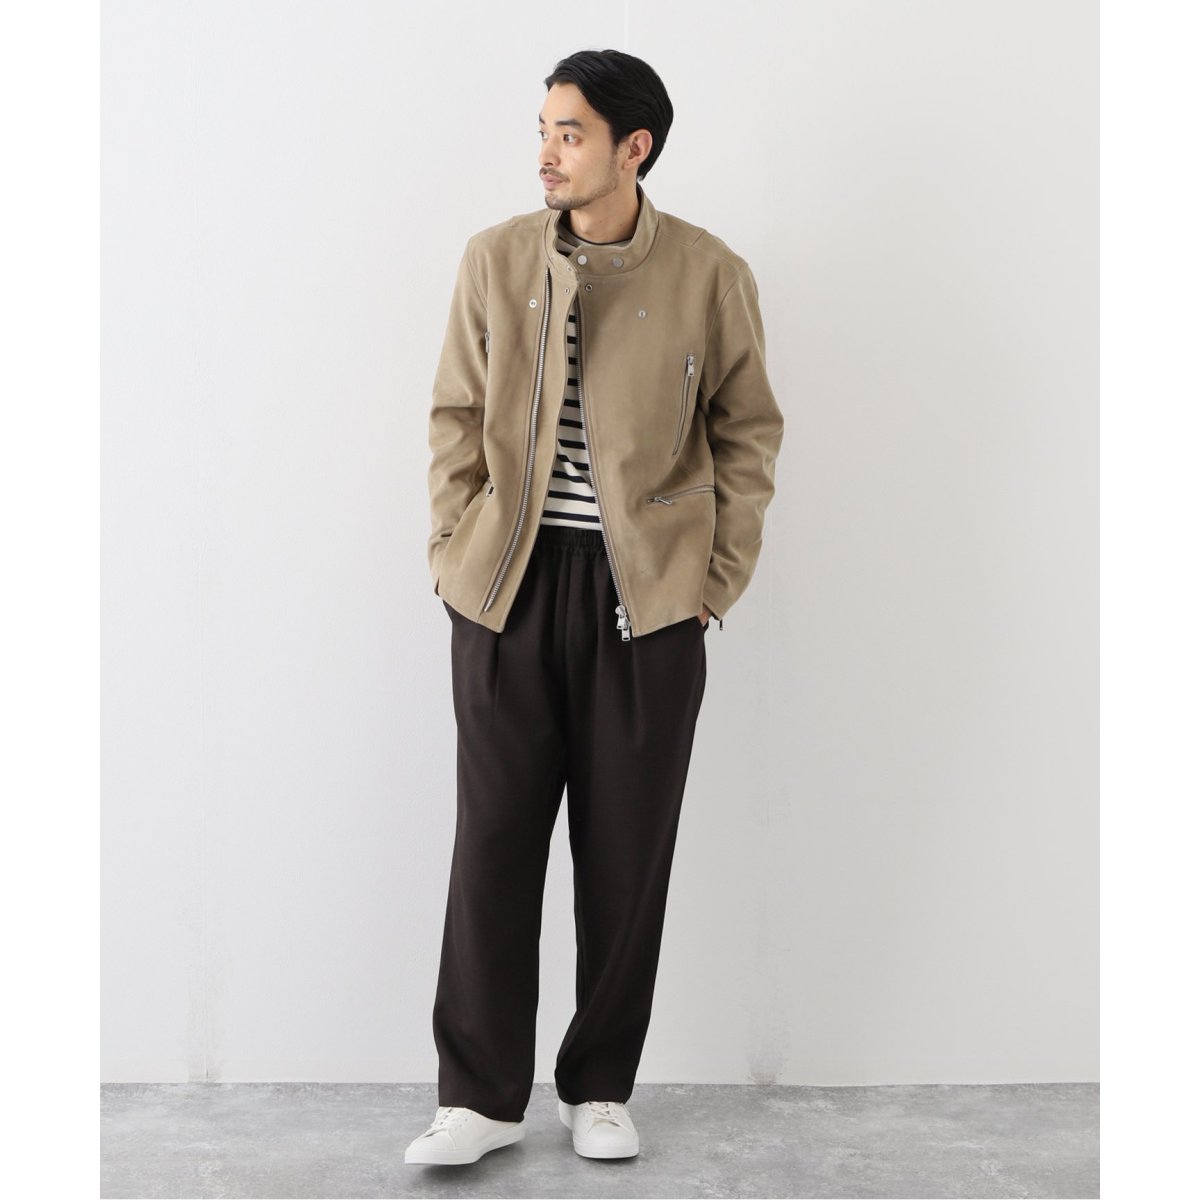 nonnative / ノンネイティブ】RIDER BLOUSON COW LEATHER by